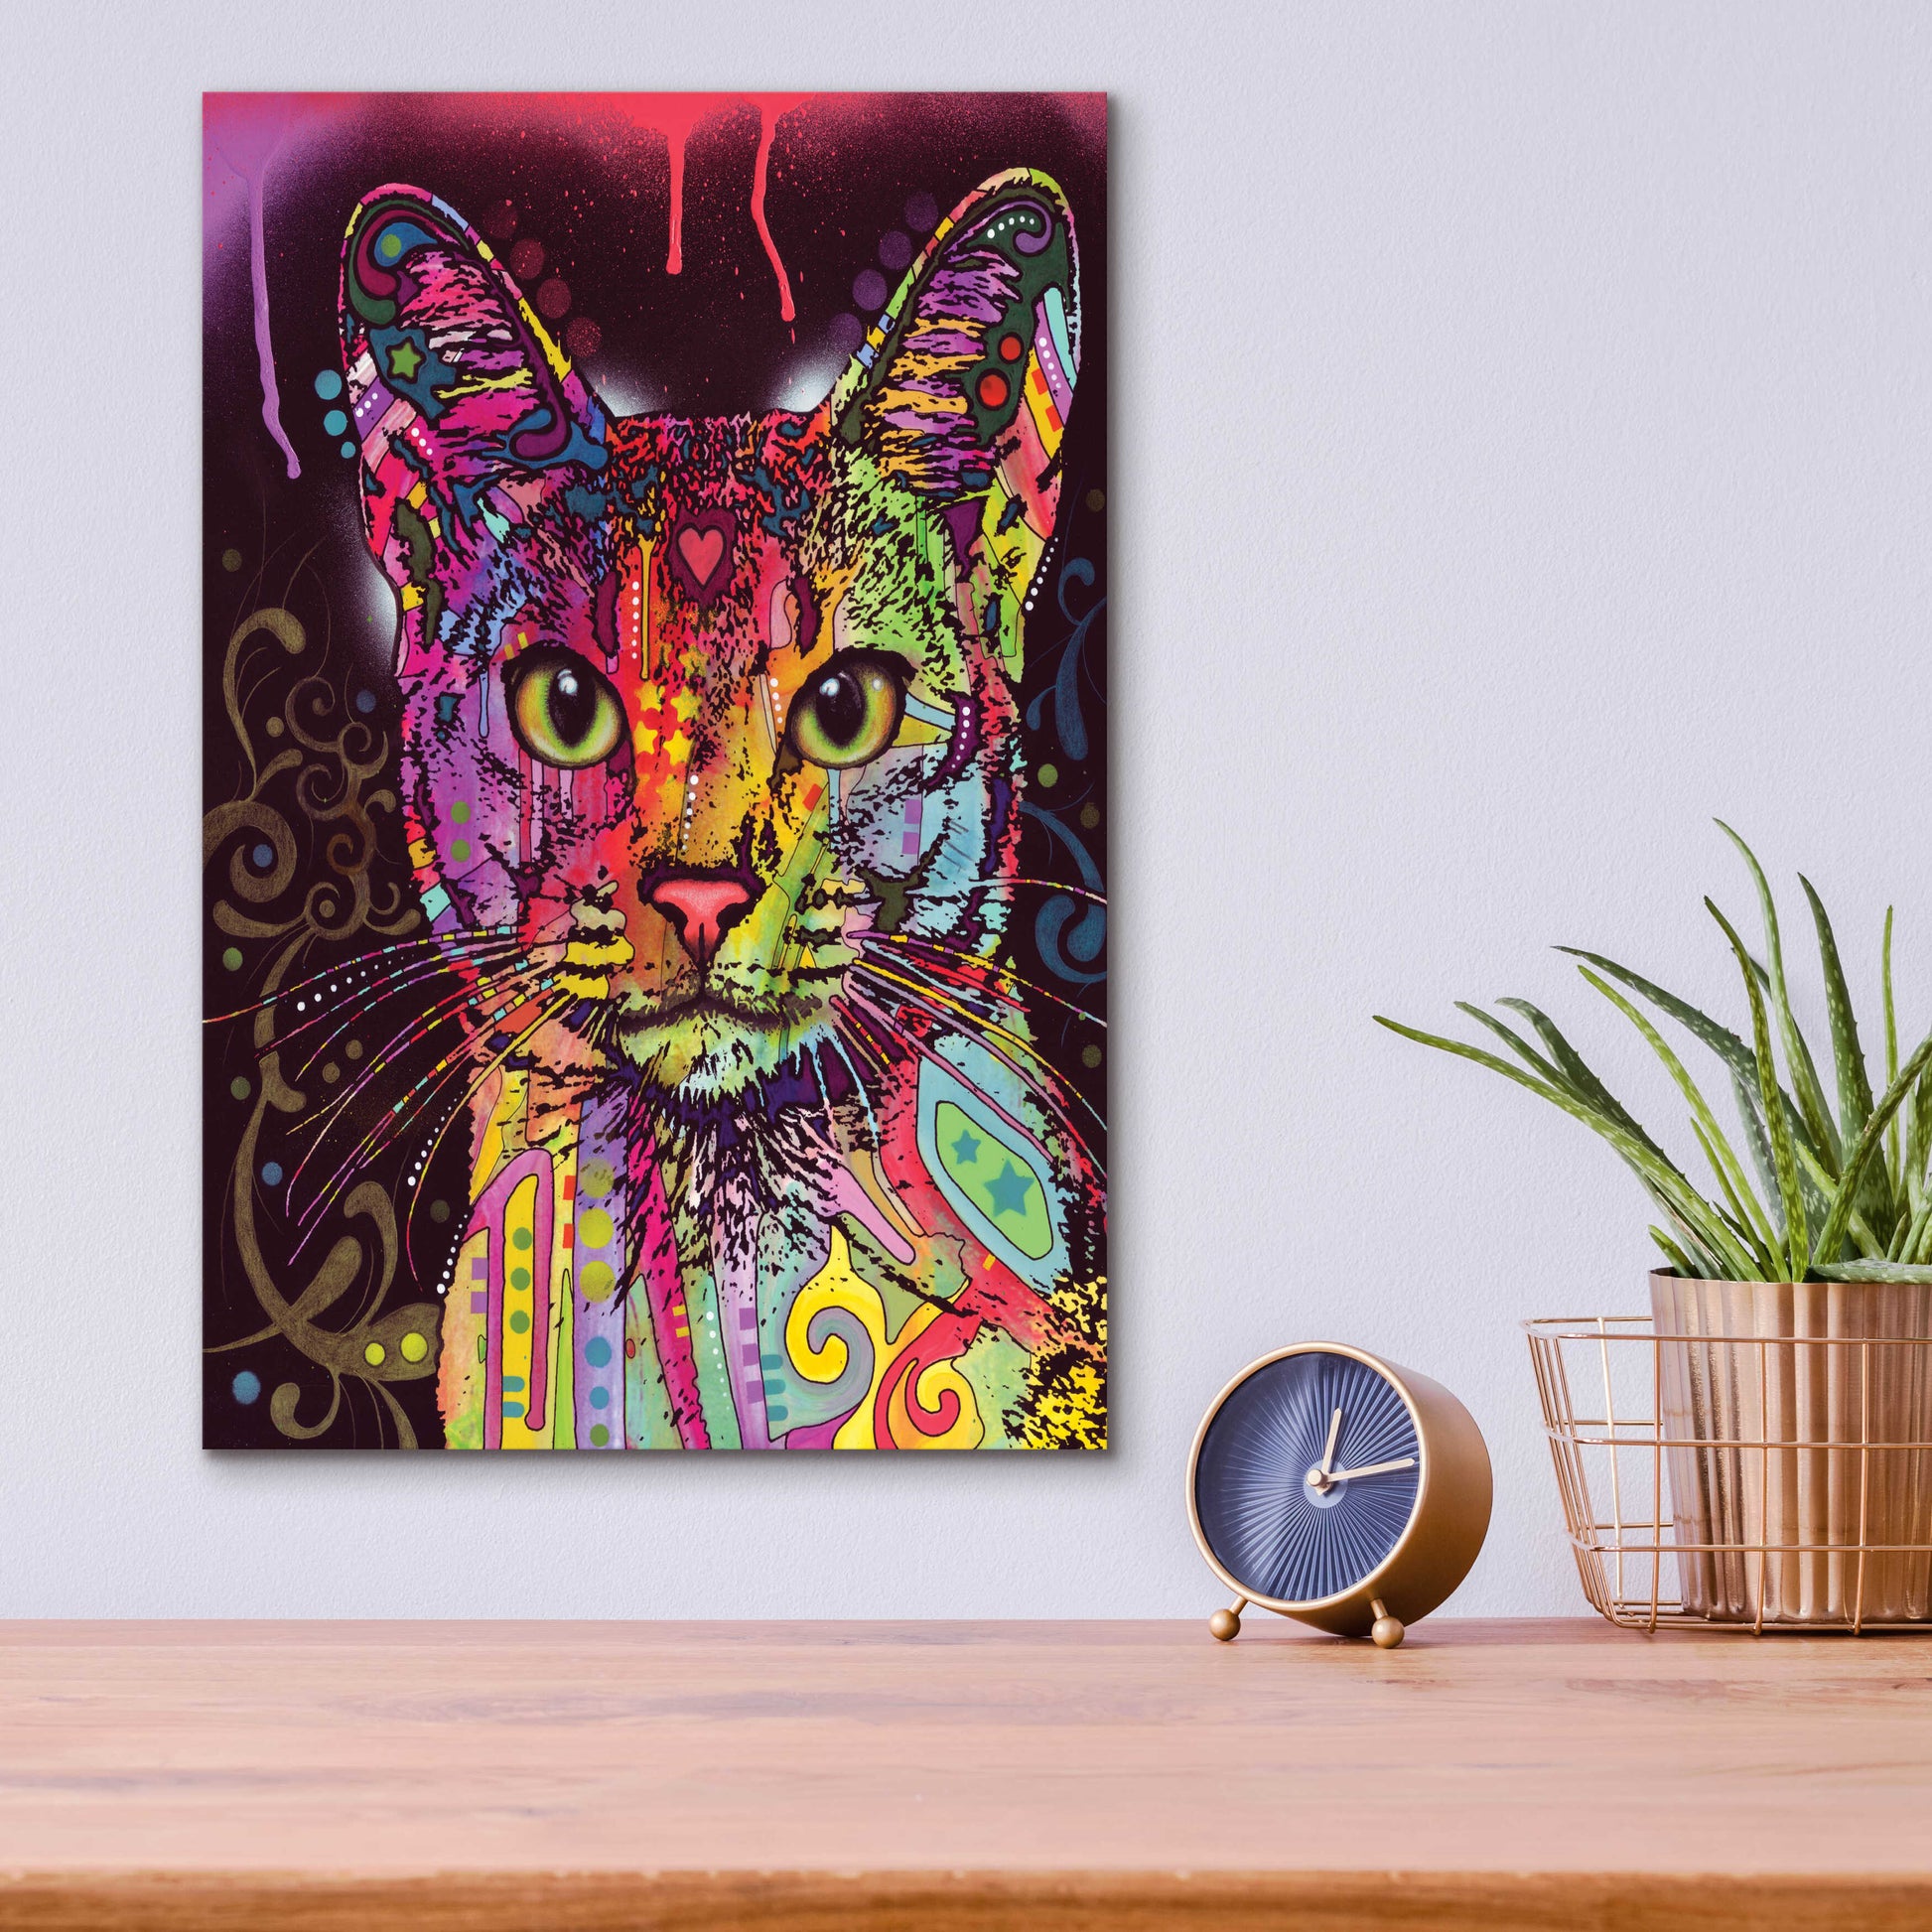 Epic Art 'Abyssinian' by Dean Russo, Acrylic Glass Wall Art,12x16